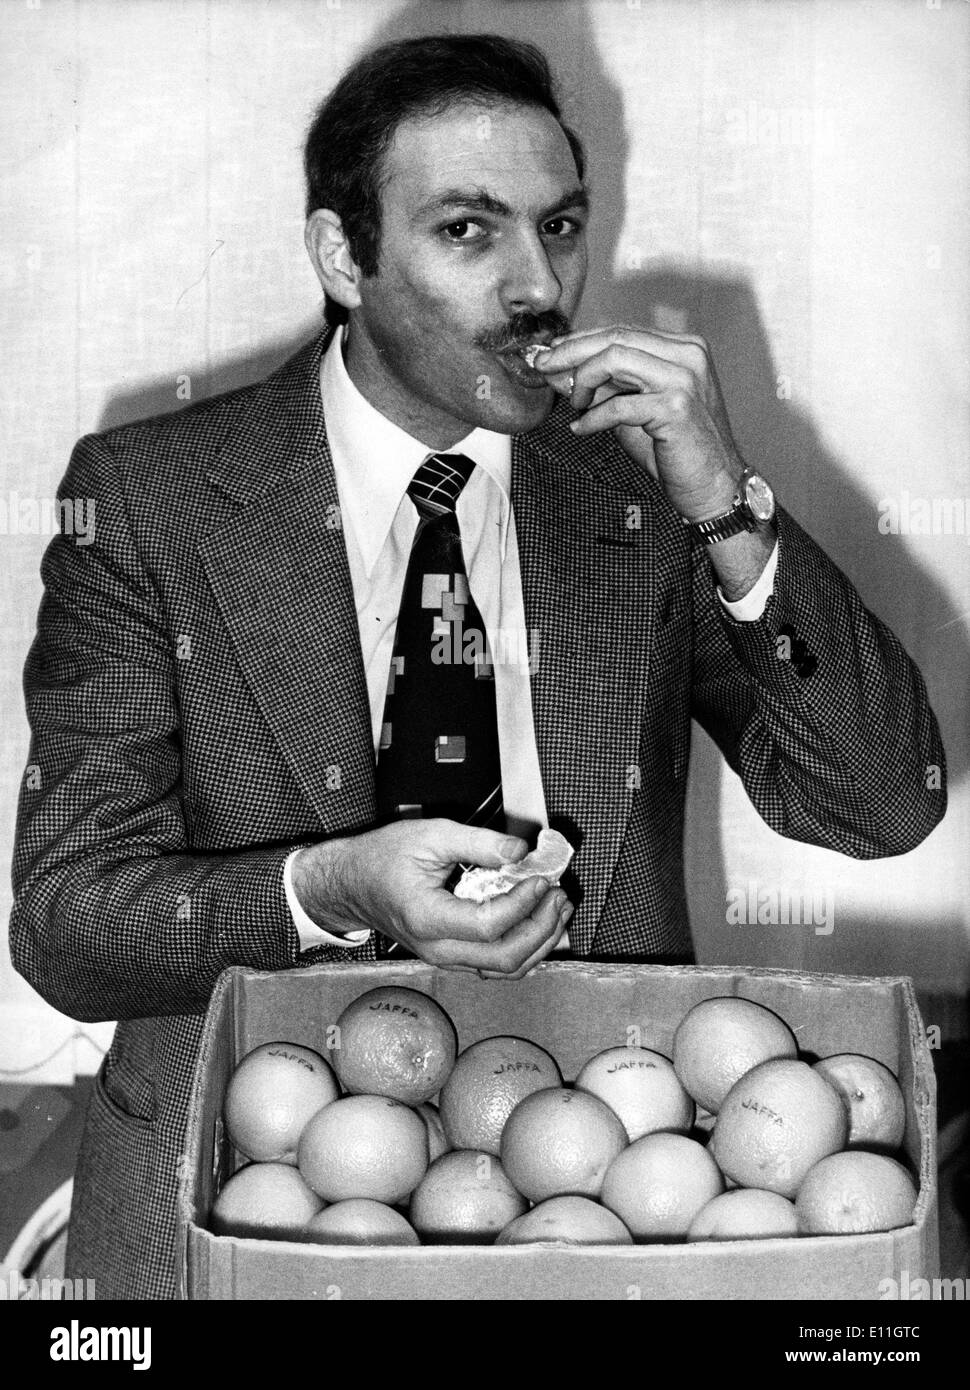 Feb 03, 1978; Paris, France; The oranges coming for Israel into Germany were presenting some mercure, France was adviced from this. The picture shows Mr. AMNON BARGER responsible for the foreign citrus marketing in France, trying an orange coming from Israel, for him was more about a pscychological war against the economy in Israel. Stock Photo